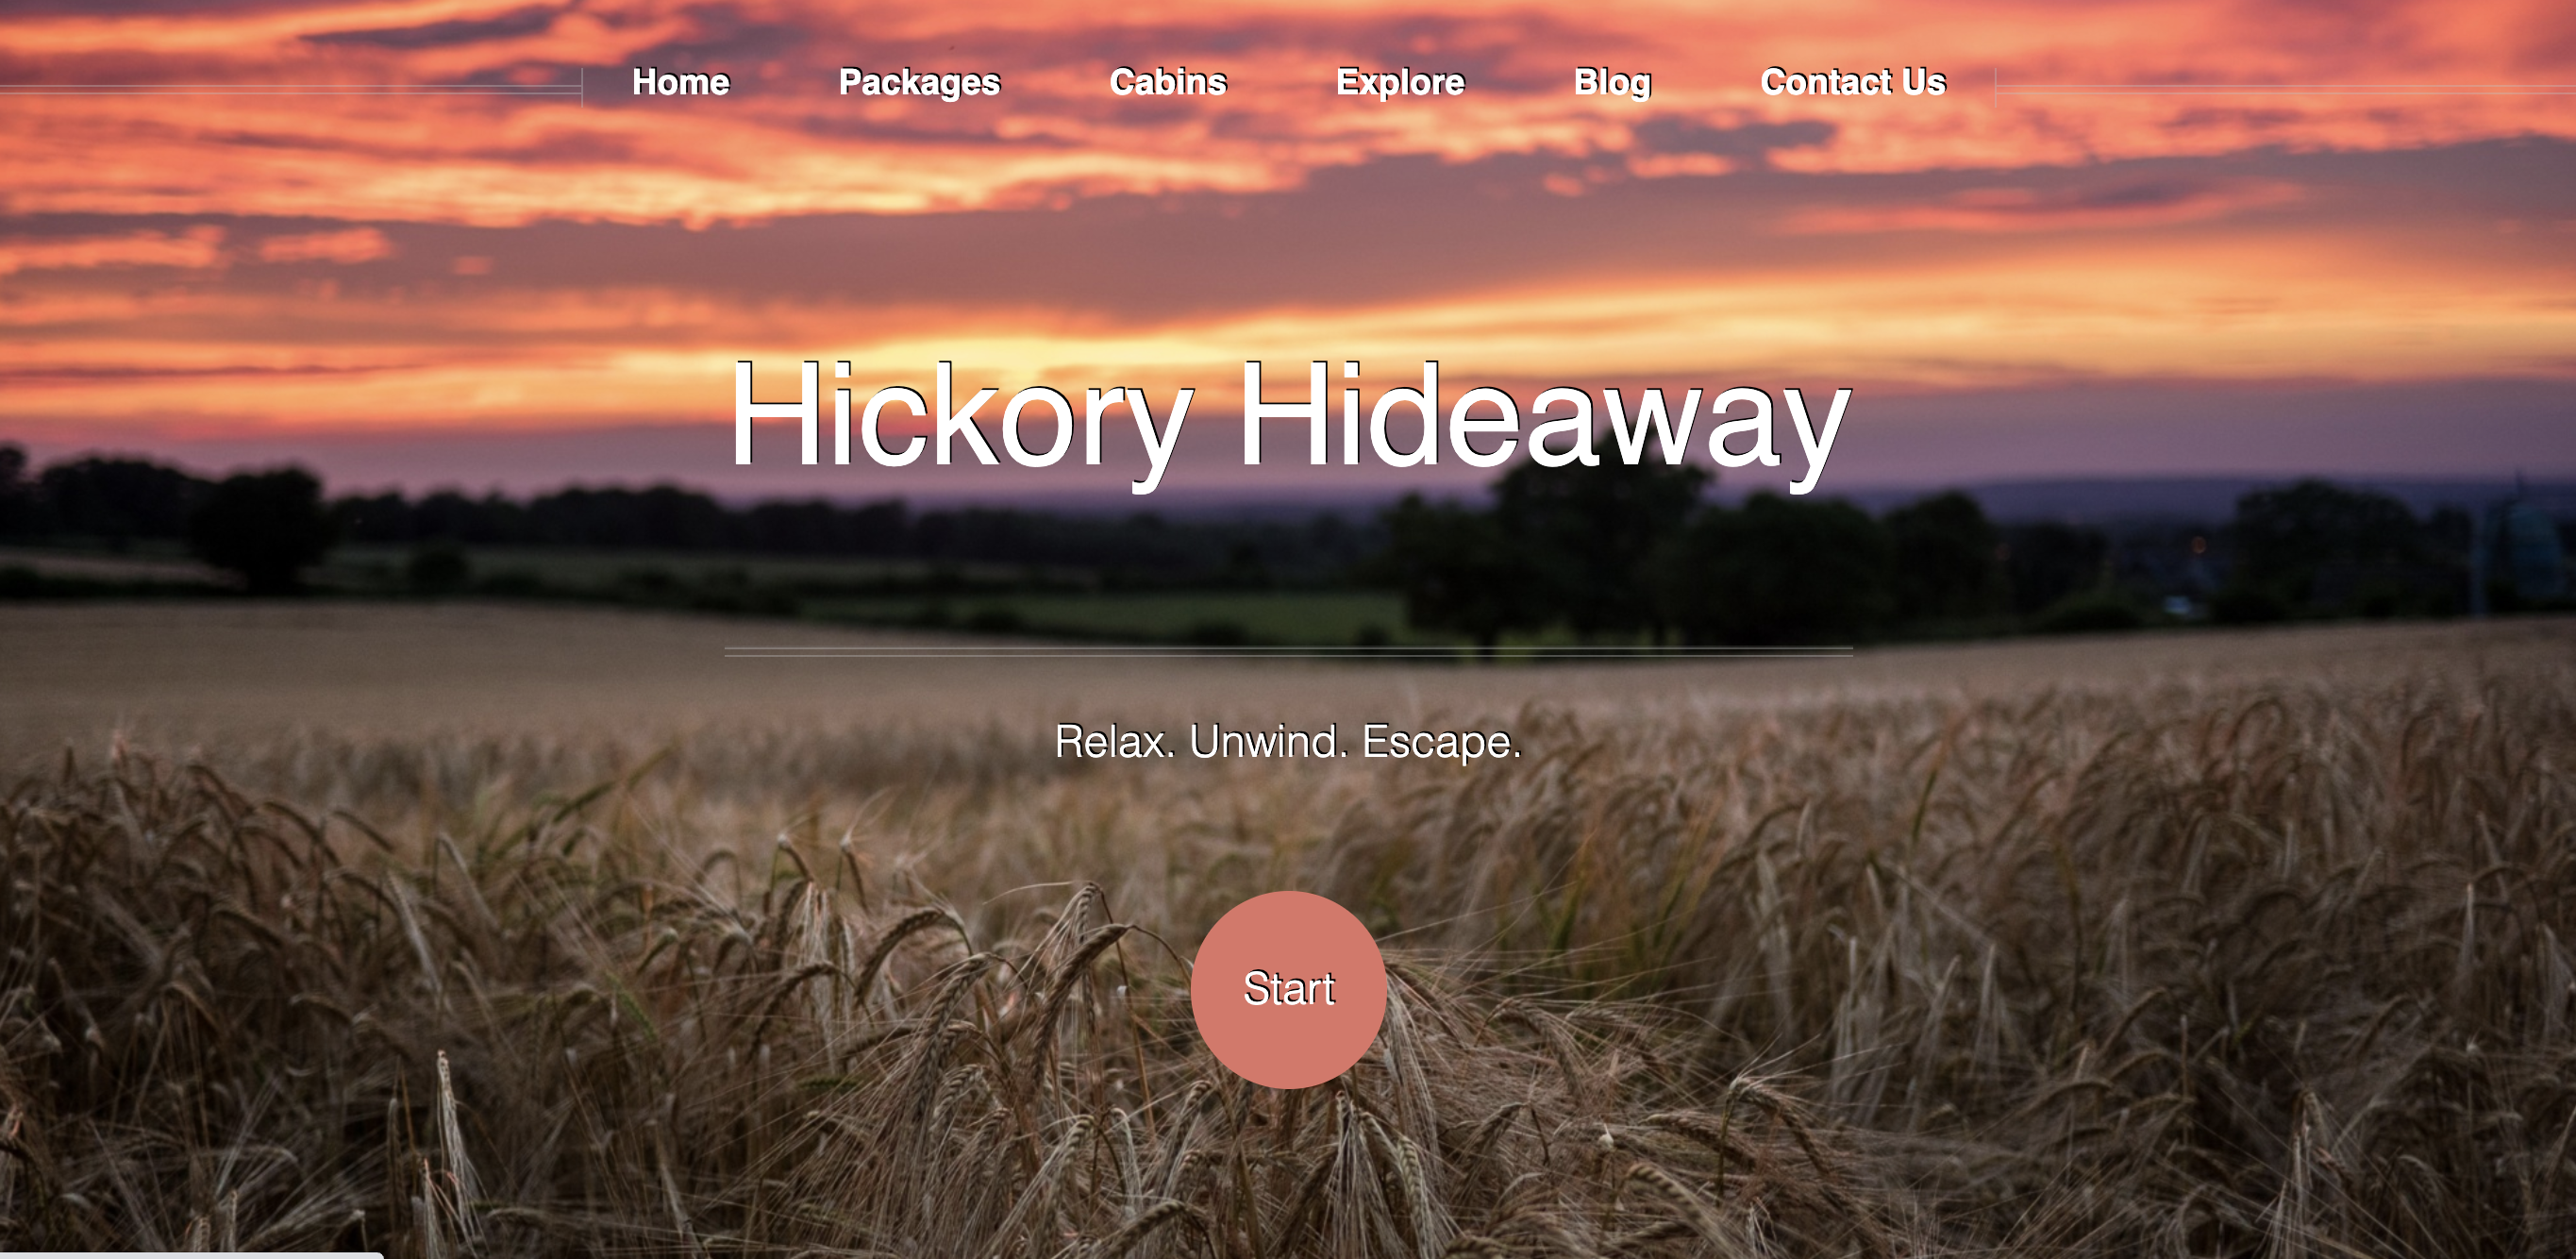 Hickory Hideaway